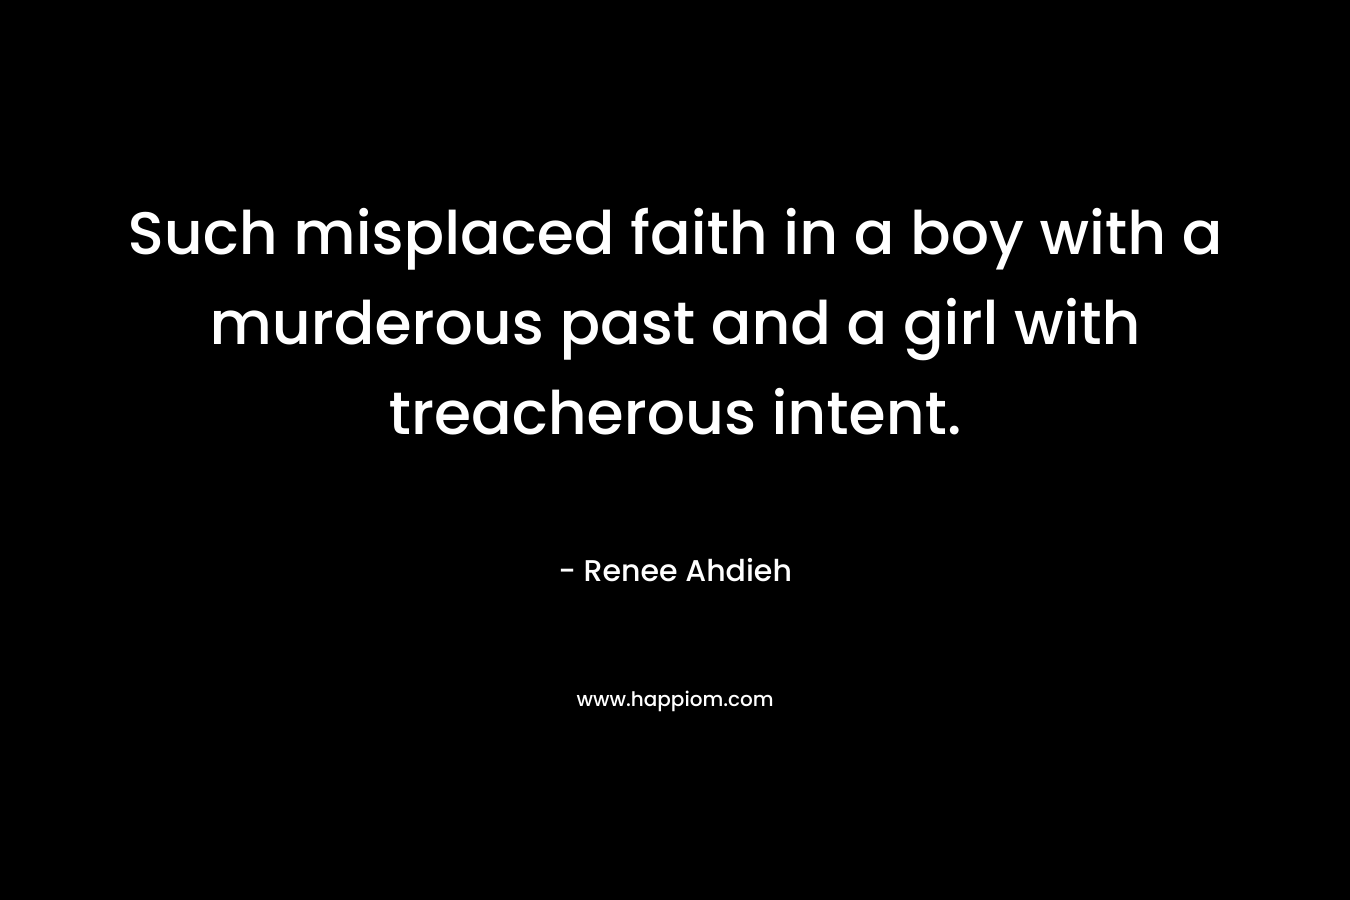 Such misplaced faith in a boy with a murderous past and a girl with treacherous intent.